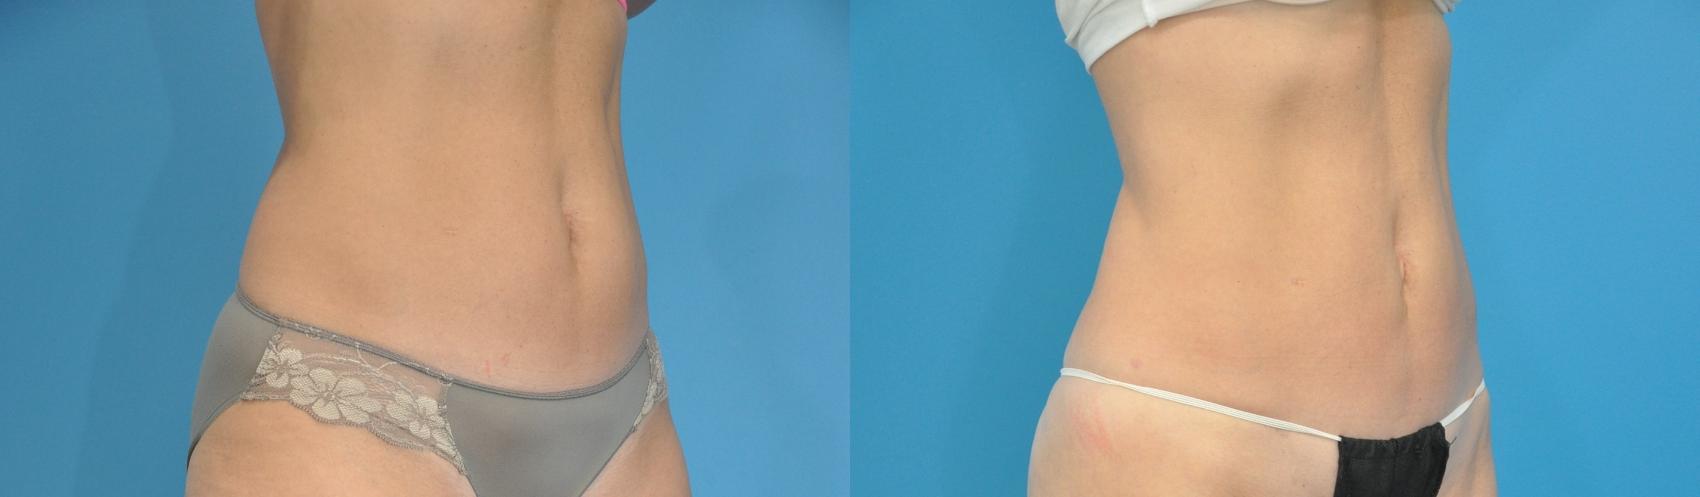 Body Contouring or Liposuction in Arlington, Which is Best?